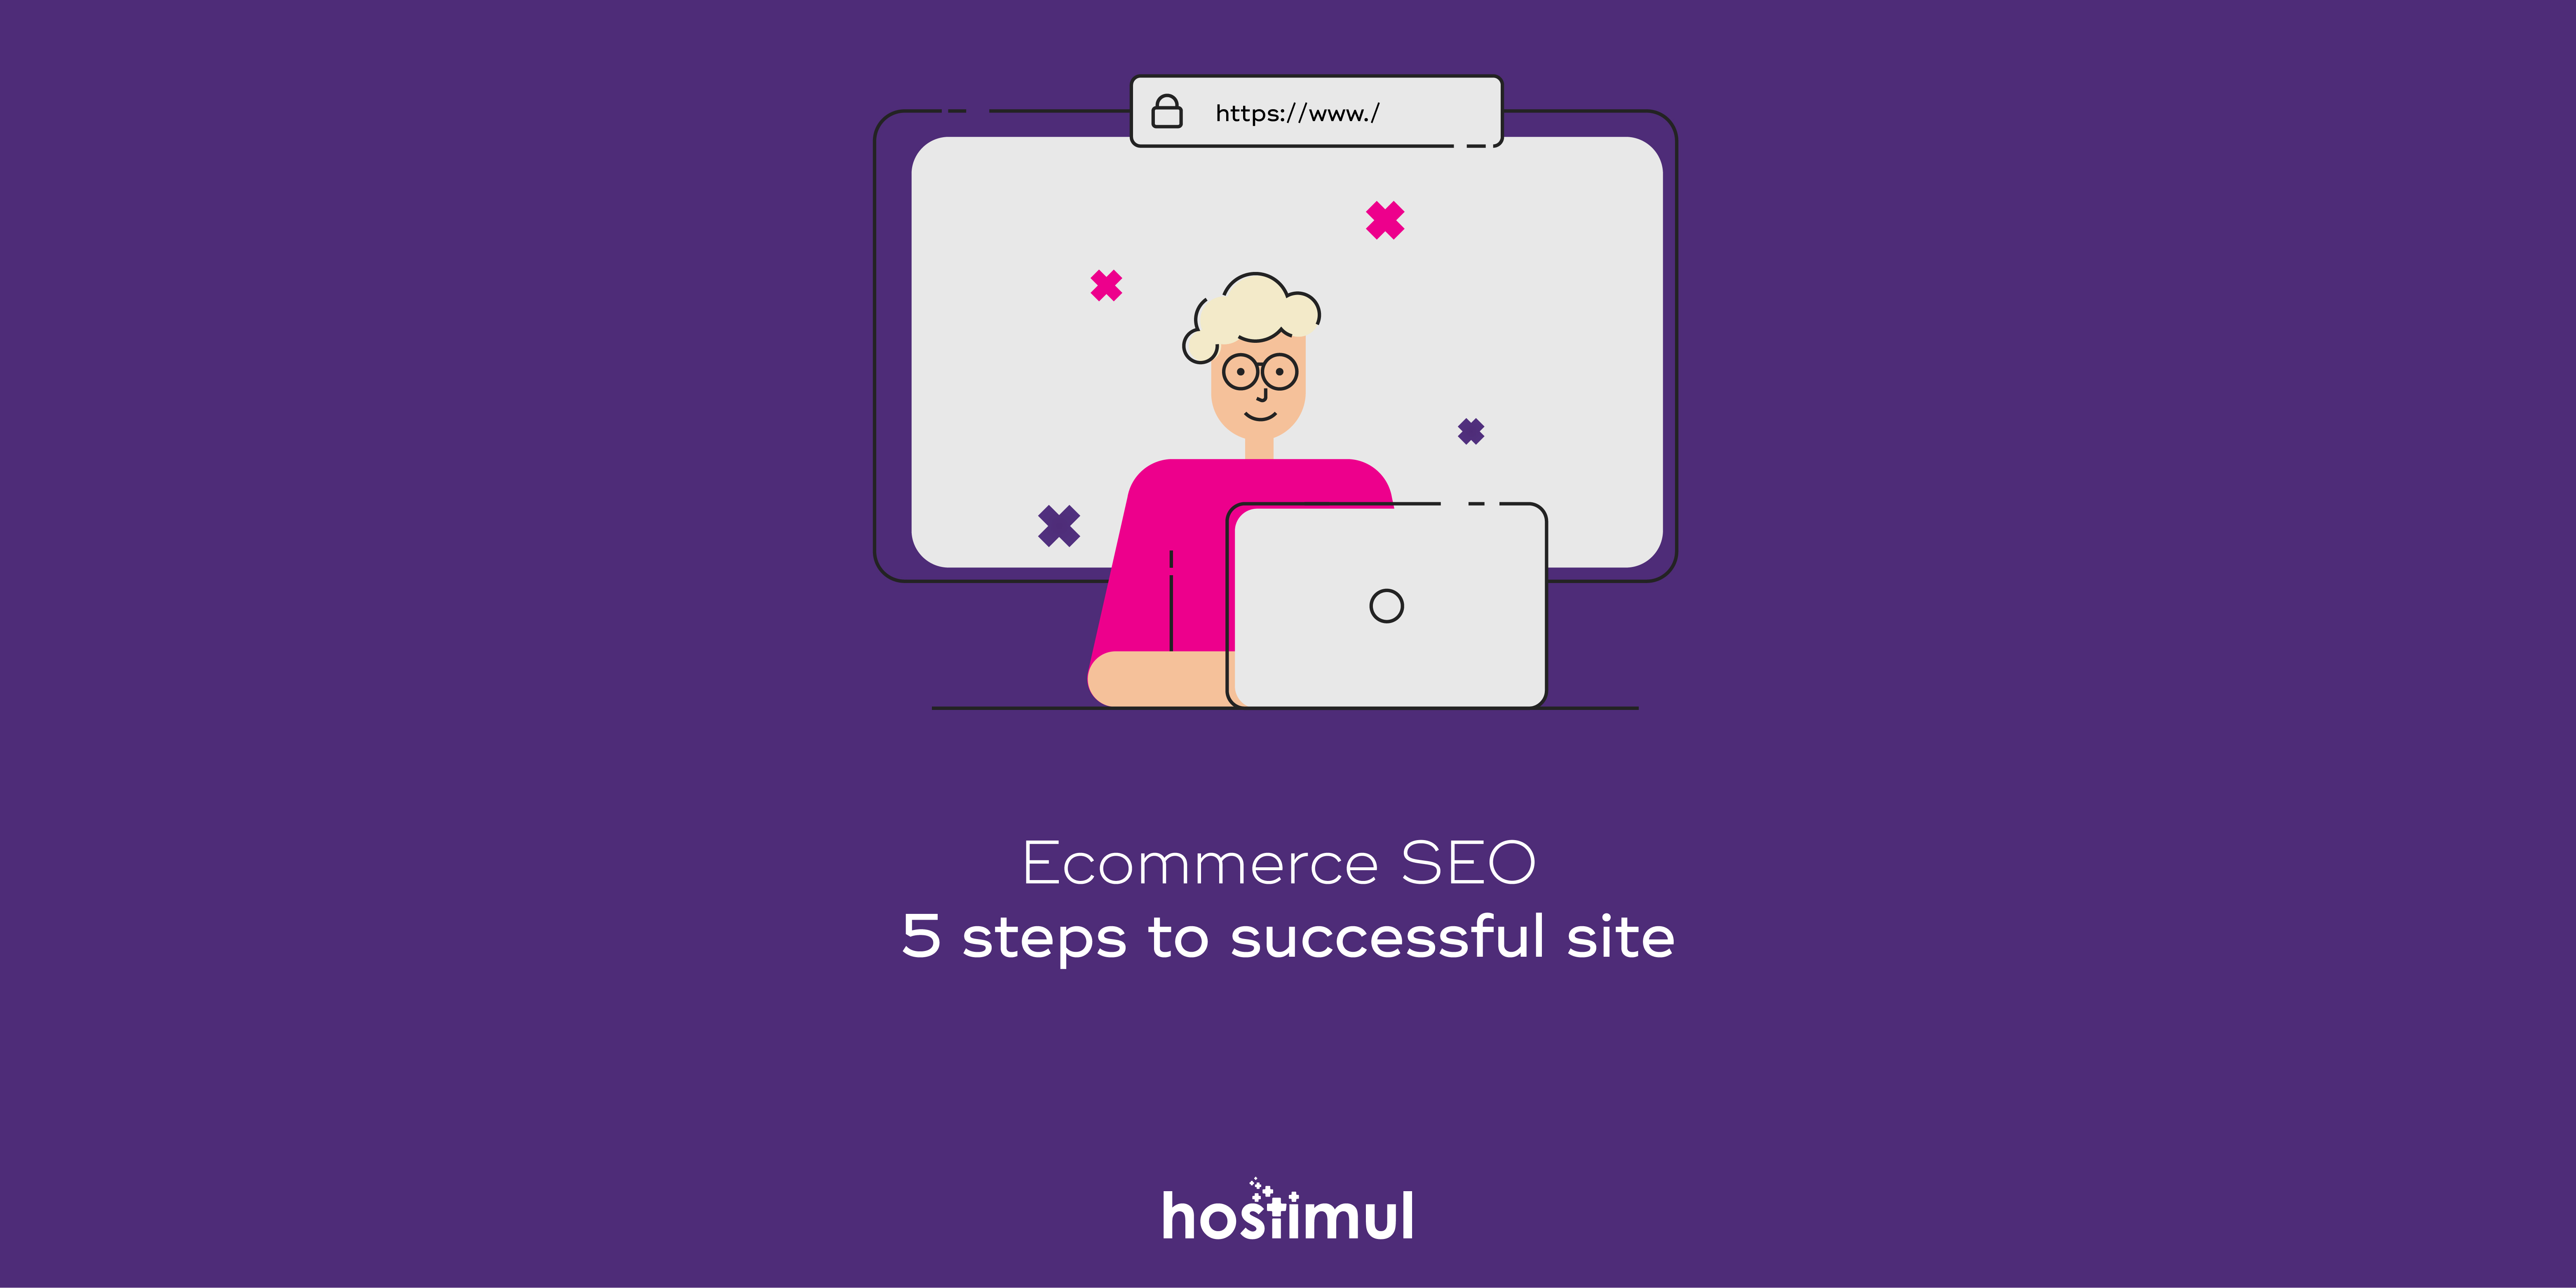 E-commerce SEO: 5 steps to a successful site 